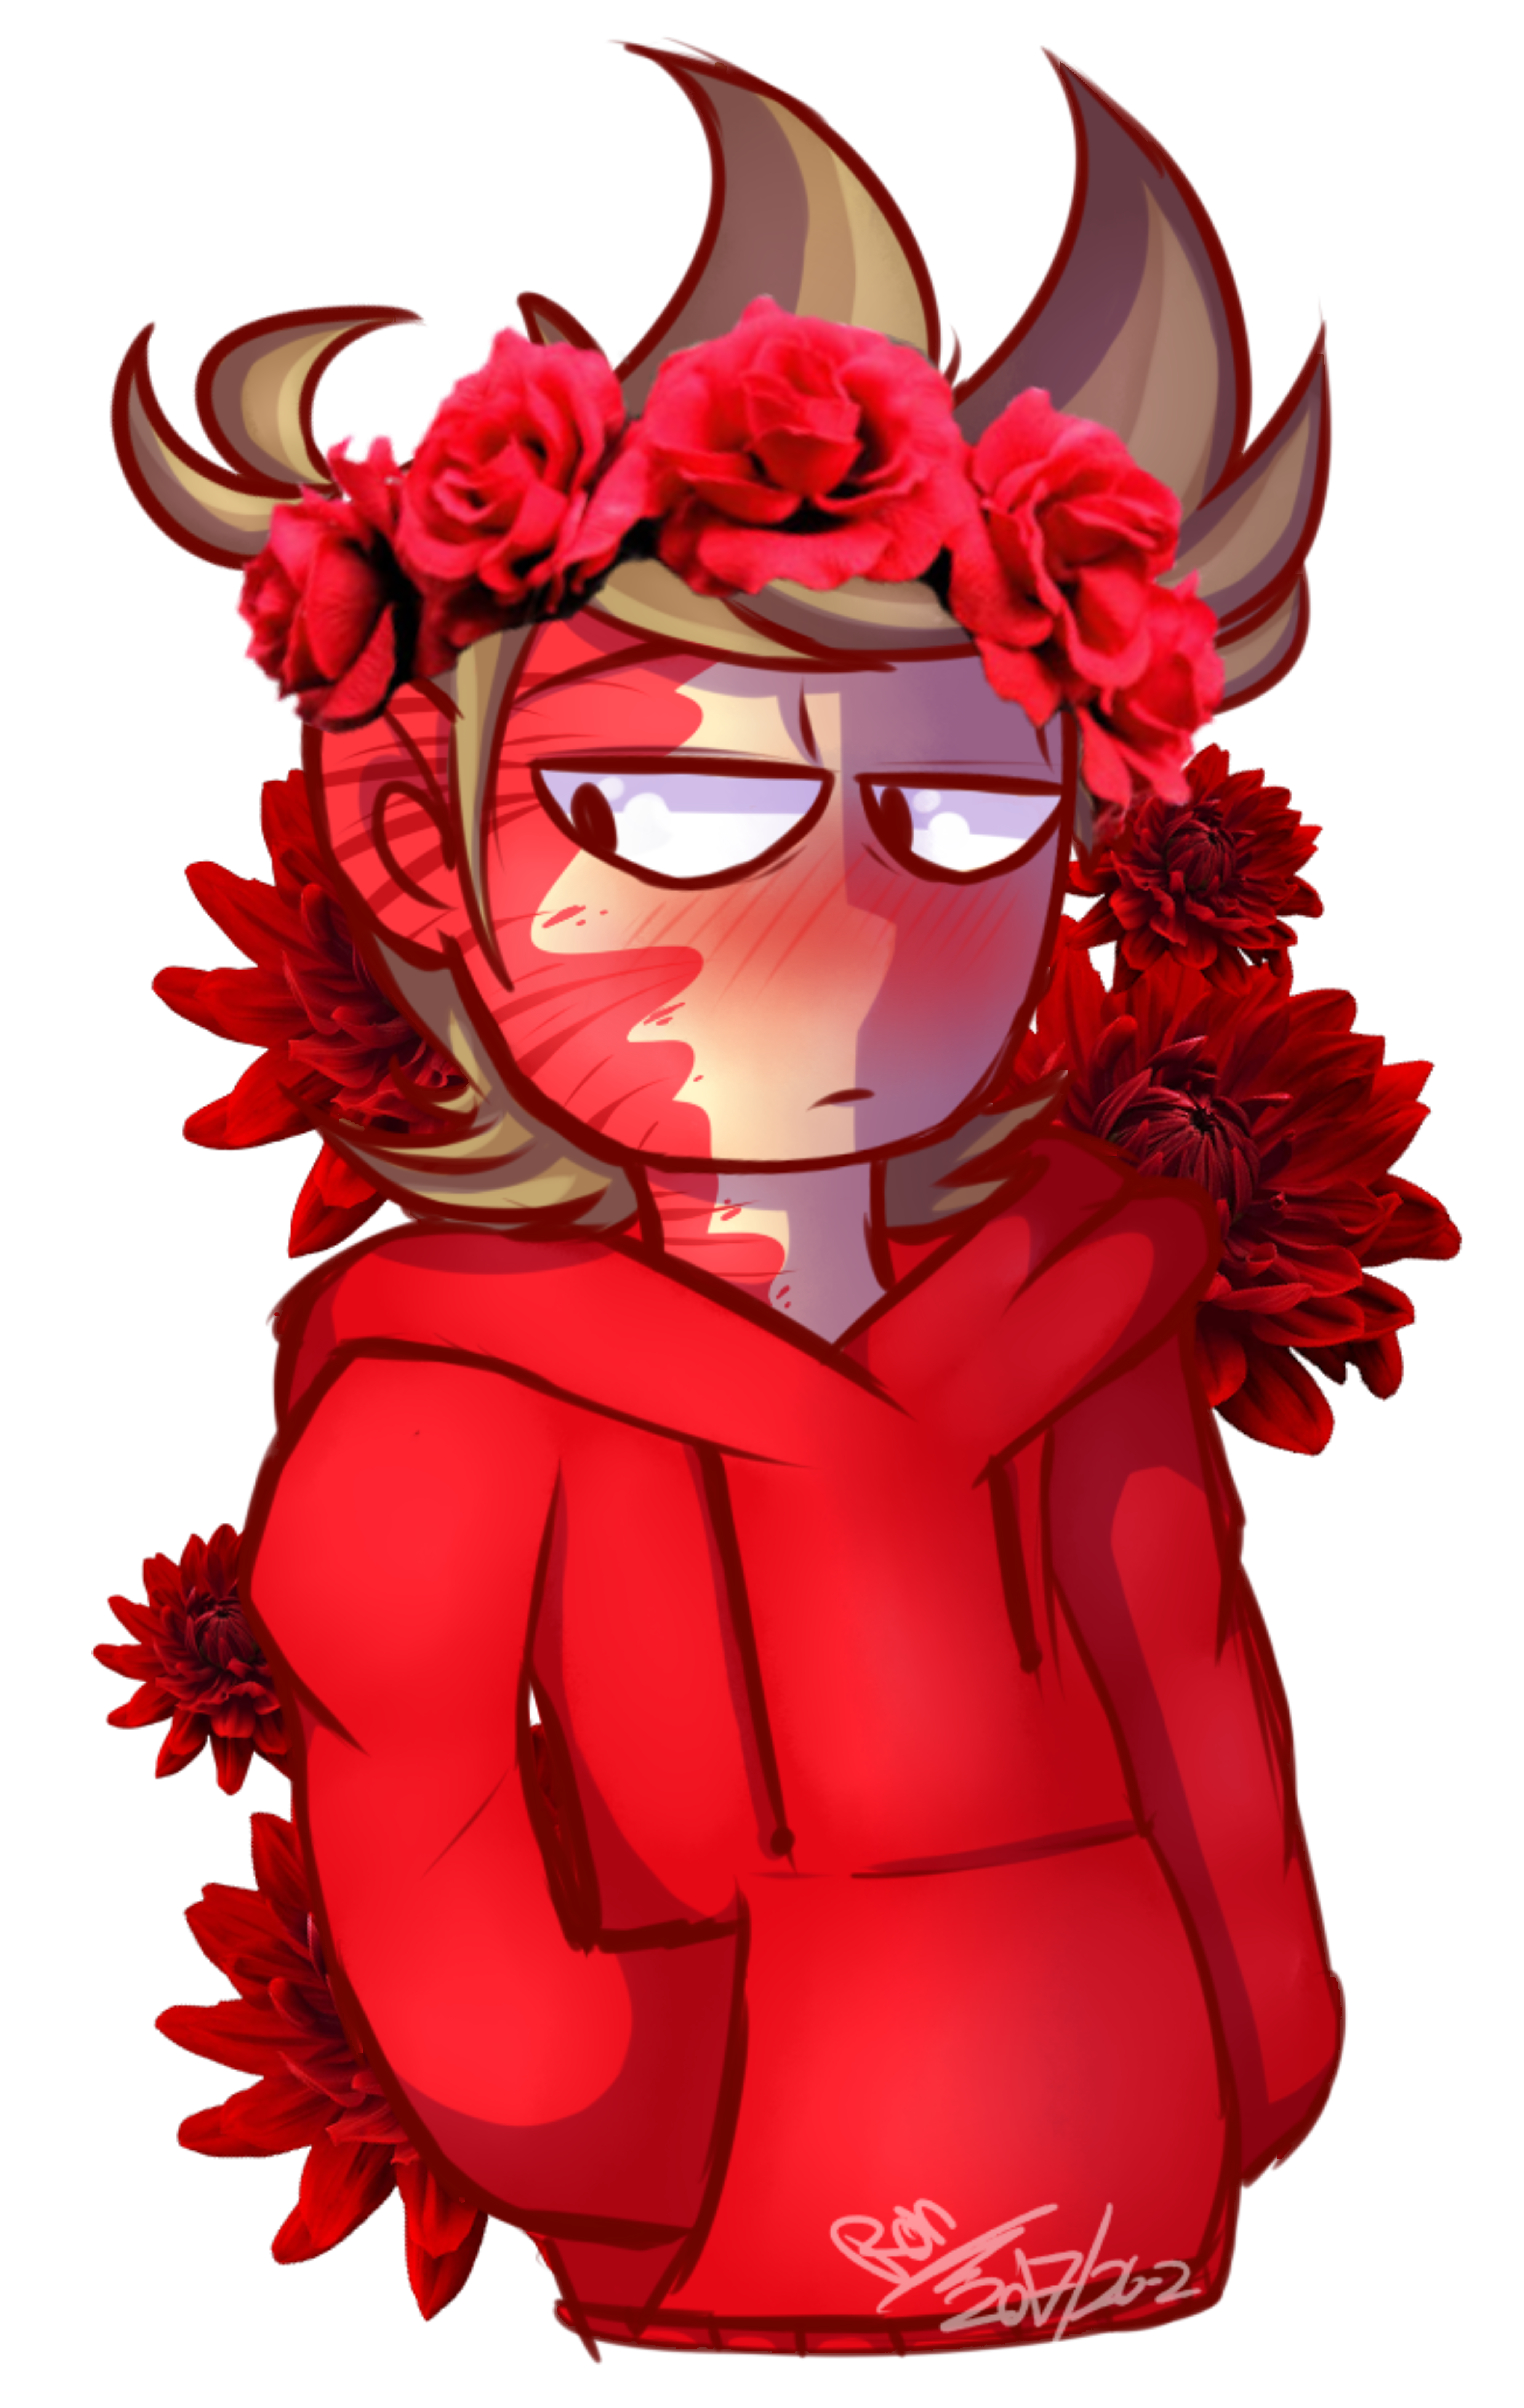 Red flower crown png. Ew tord by b